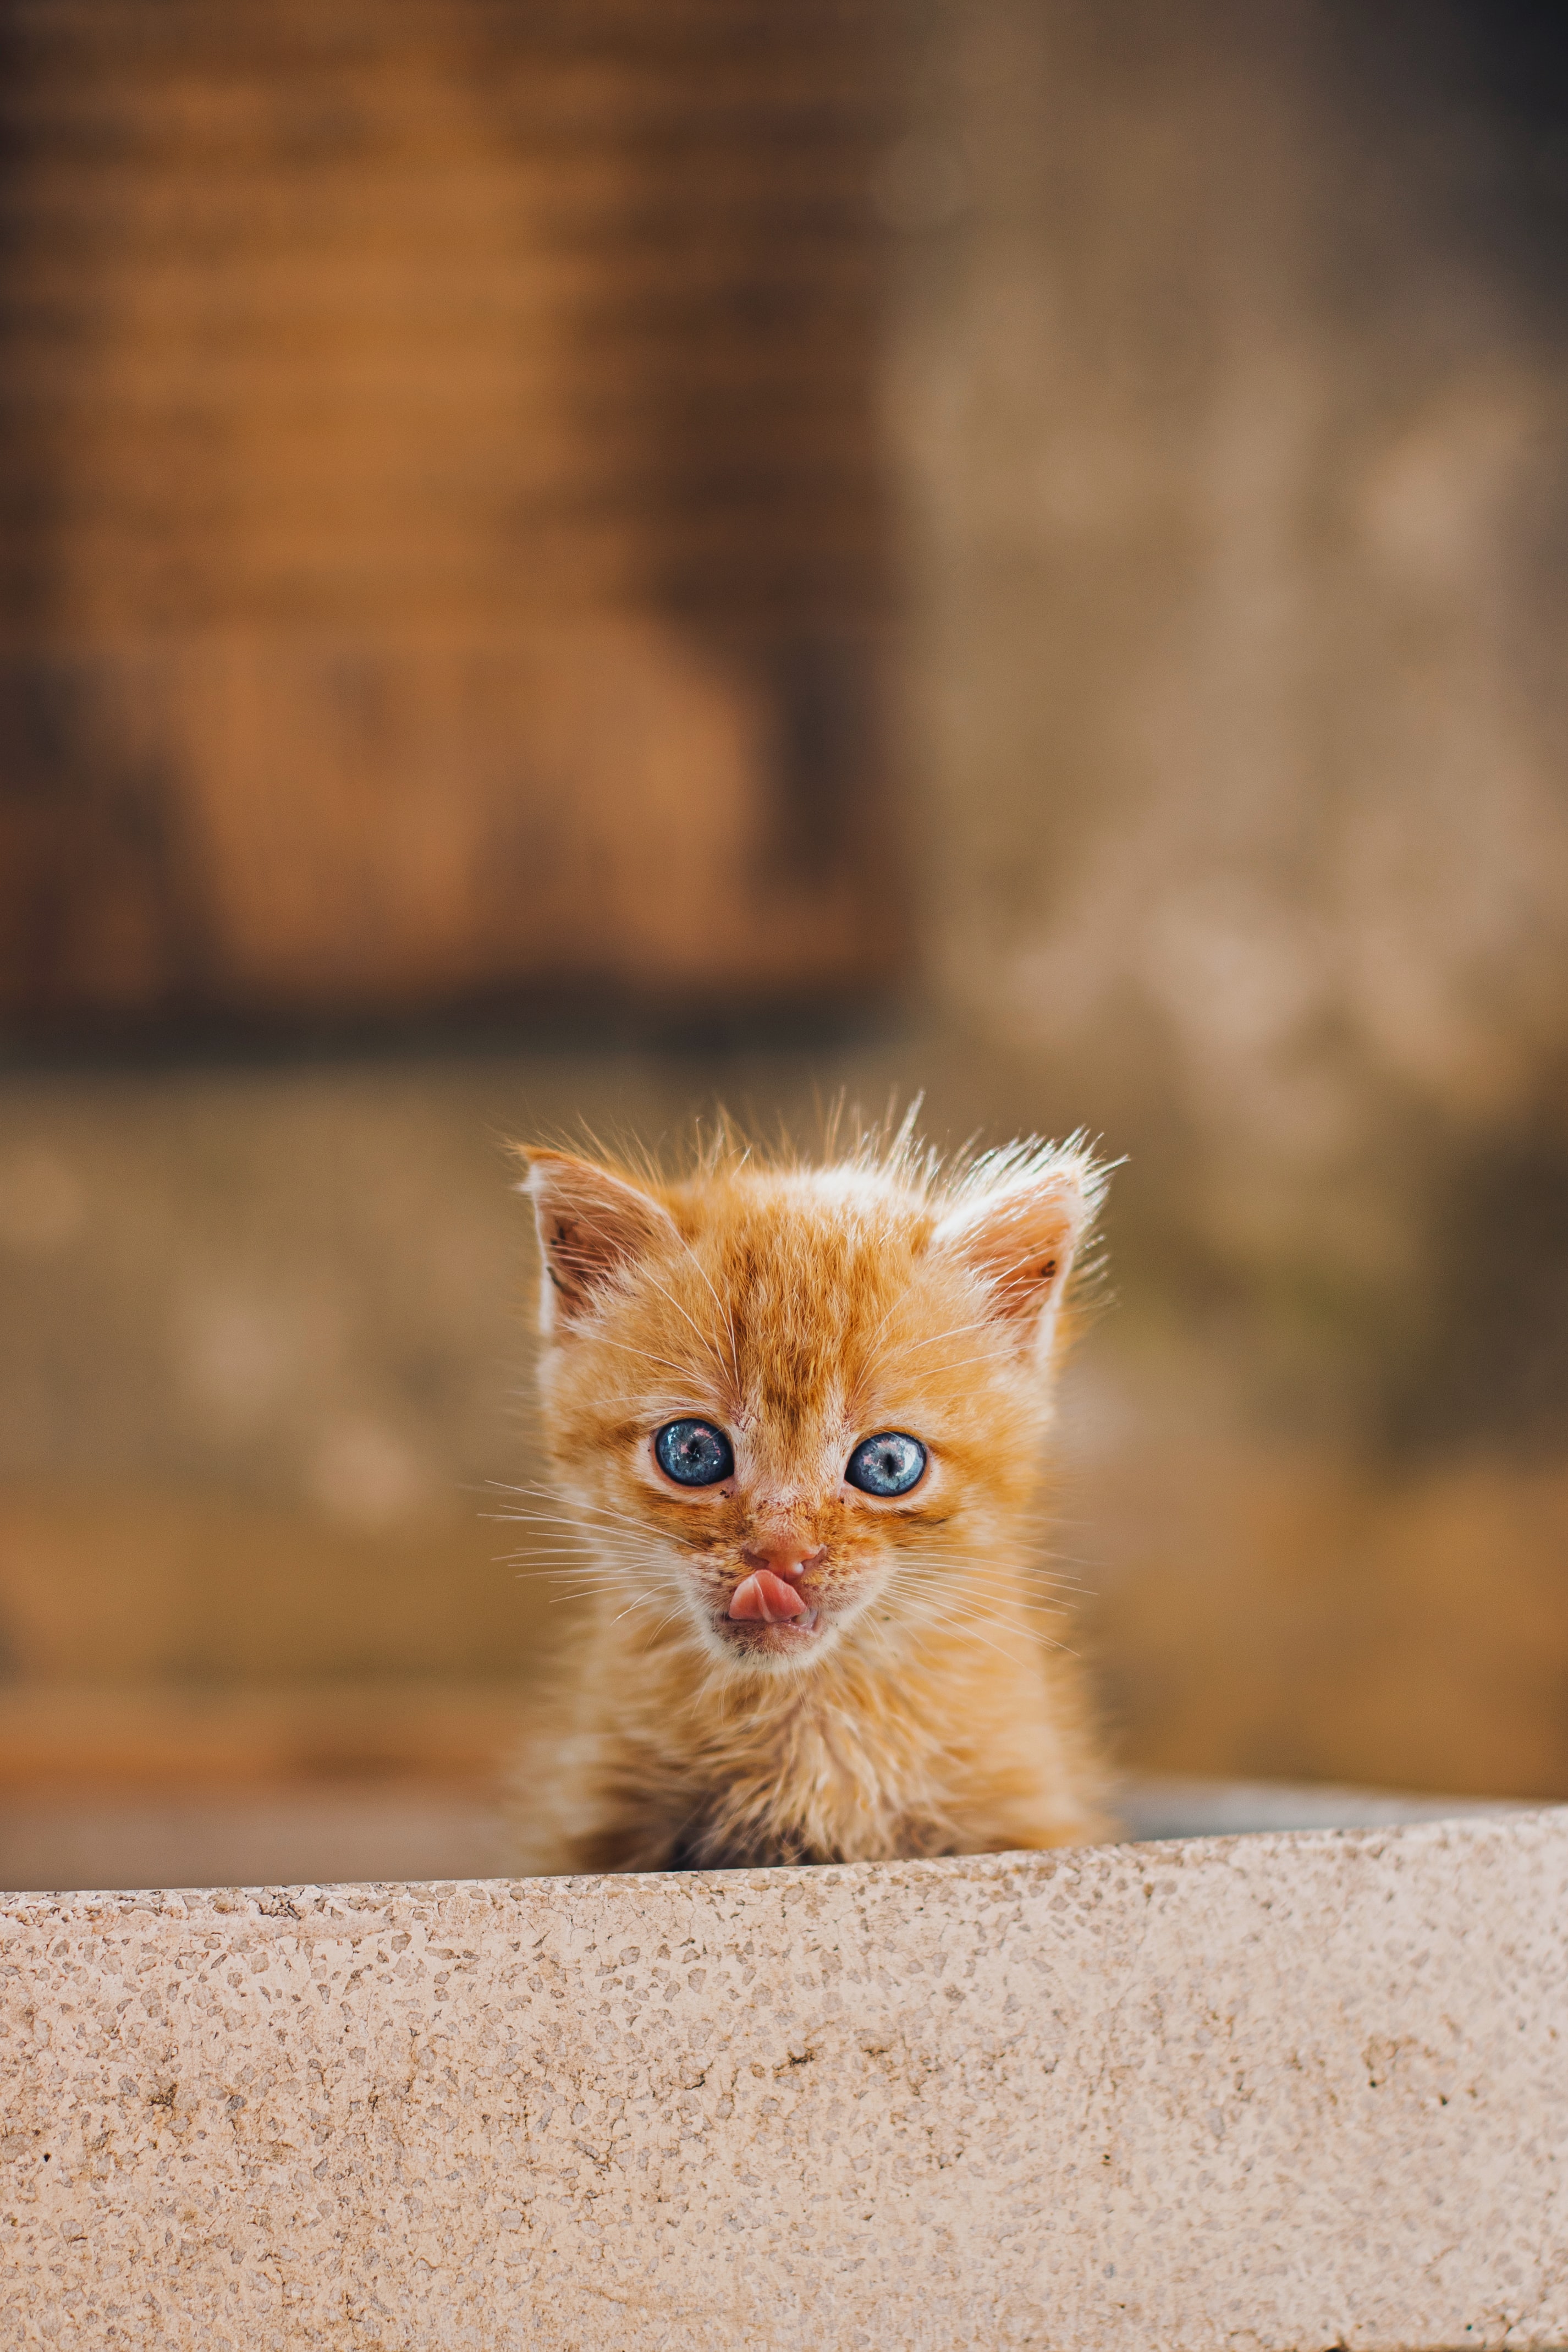 sweetheart, animals, red, kitty, kitten, nice, protruding tongue, tongue stuck out, redhead